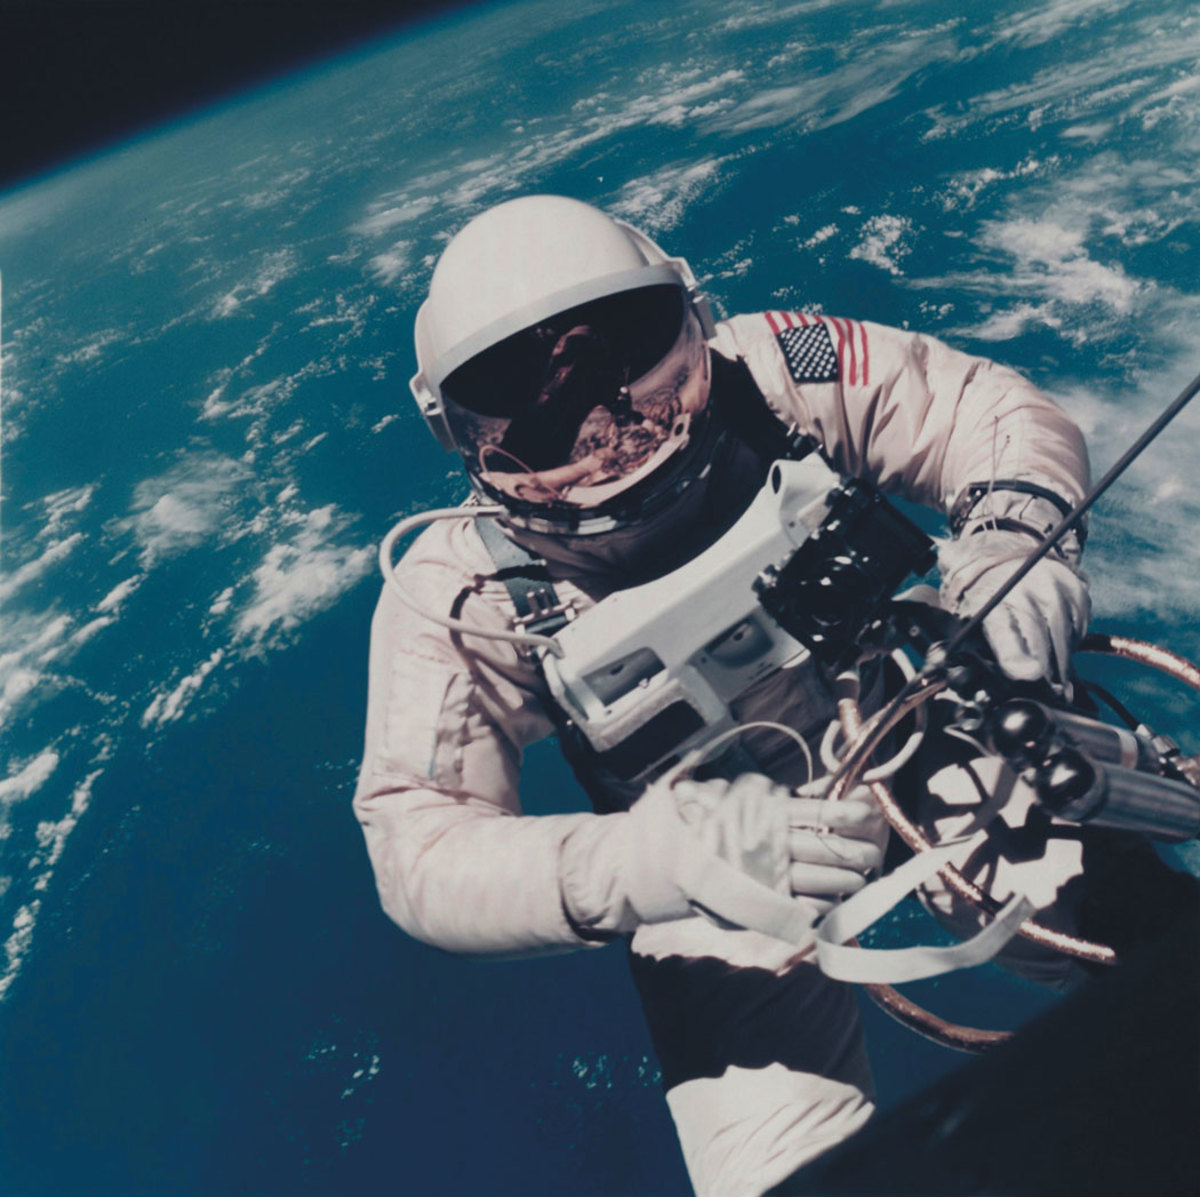 During Gemini IV (June 3-7, 1965) Astronaut Ed White became the first American to venture outside his spacecraft for what is officially known as an extravehicular activity, or EVA. The world has come to know it as a spacewalk. In the following years, it was a skill that allowed Apollo explorers to walk on the moon and American astronauts and their partners from around the world to build the International Space Station. White floated outside the capsule attached by an umbilical cord tether providing oxygen and communications from the spacecraft while inside Astronaut Jim McDivitt took pictures. The photograph sold for $3,250.